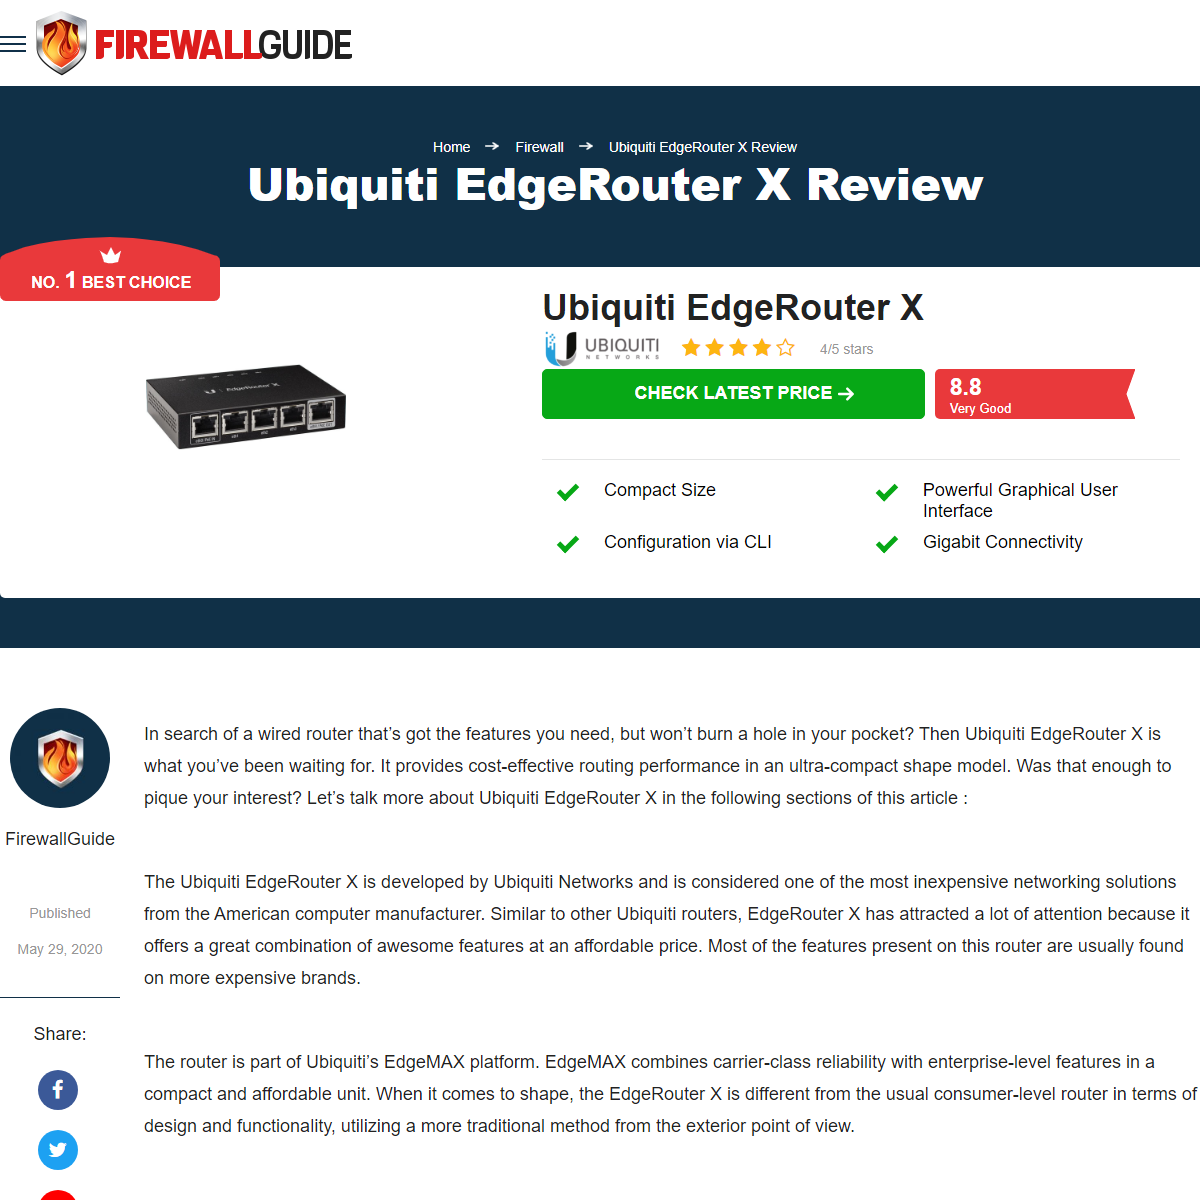 A complete backup of https://firewallguide.com/firewall/wired-router/ubiquiti-edgerouter-x-review/